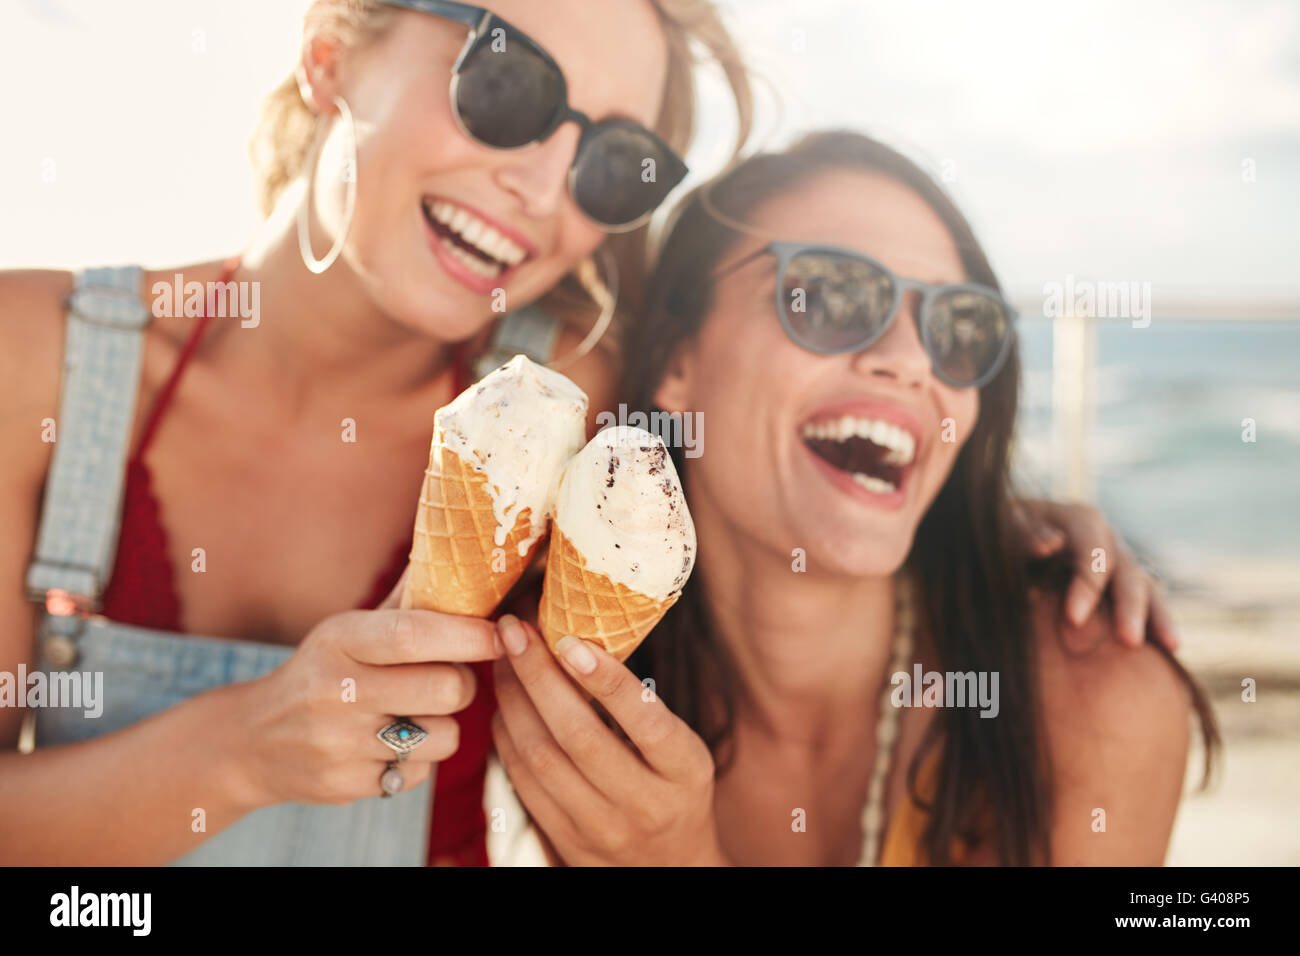 Two young female friends having fun and eating ice cream. Cheerful young women eating icecream outdoors. Stock Photo